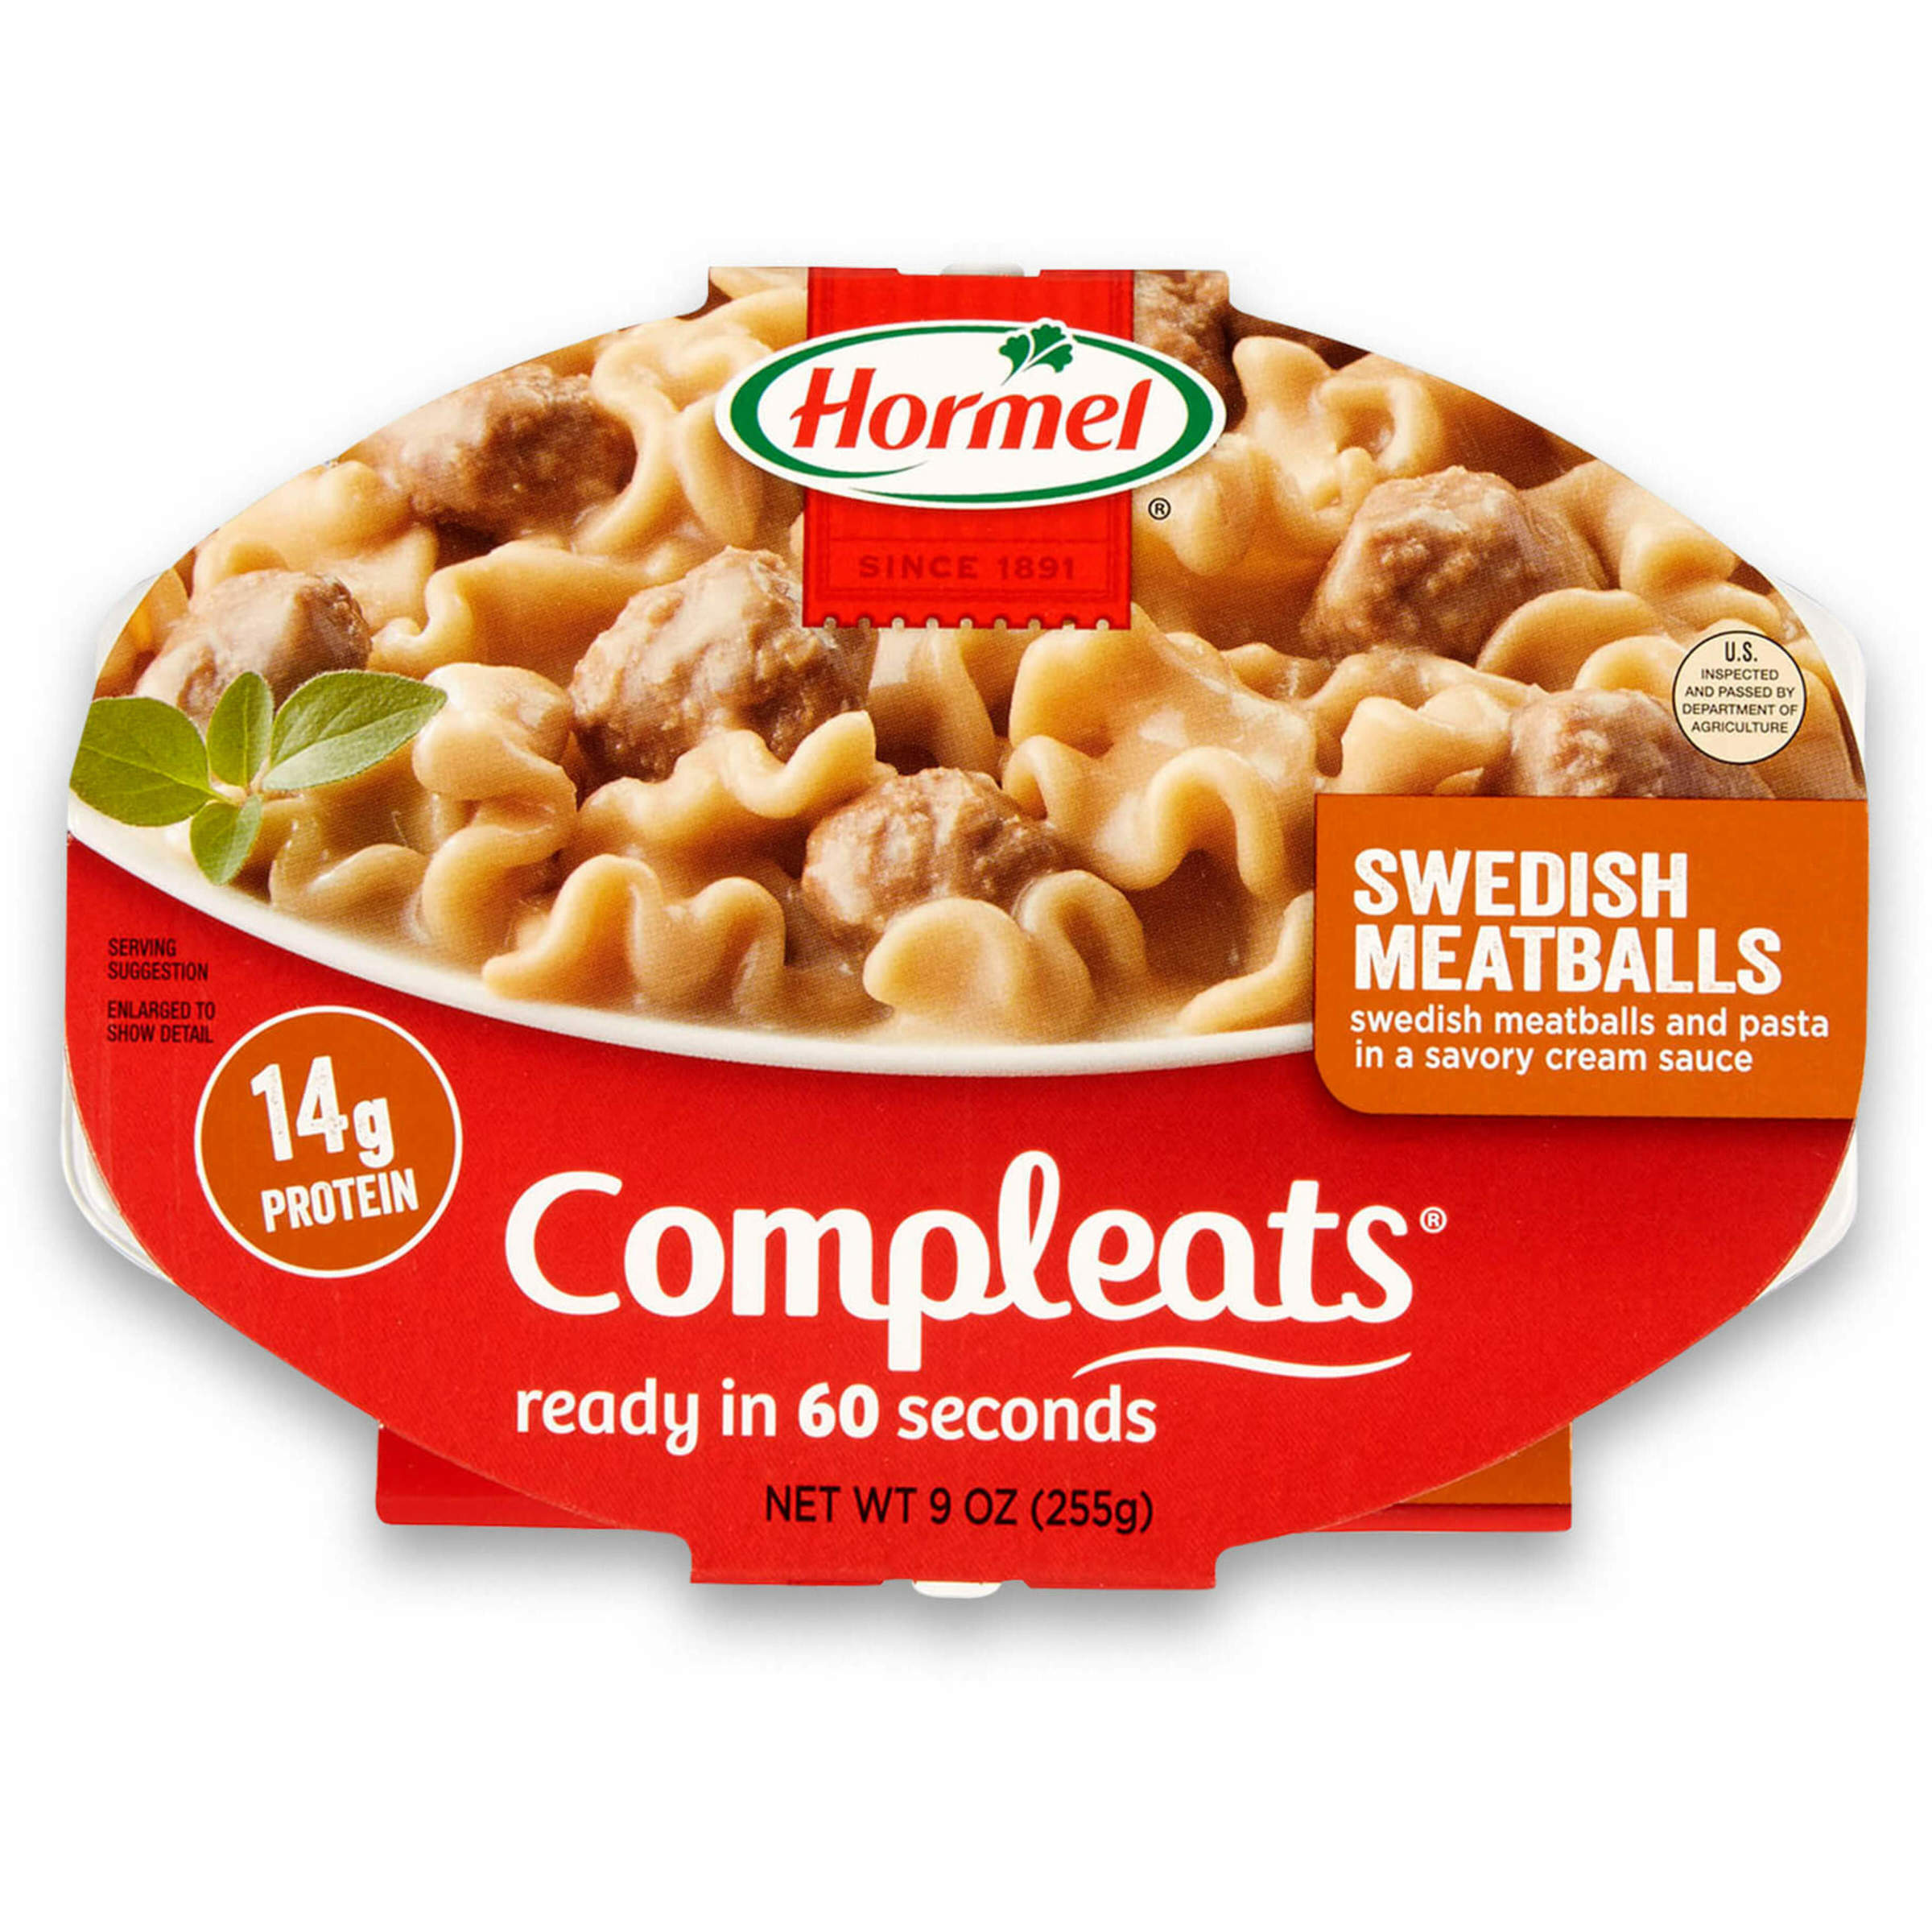 HORMEL COMPLEATS Swedish Meatballs with Pasta in Cream Sauce, Shelf Stable, 9 oz Plastic Tray - image 1 of 12